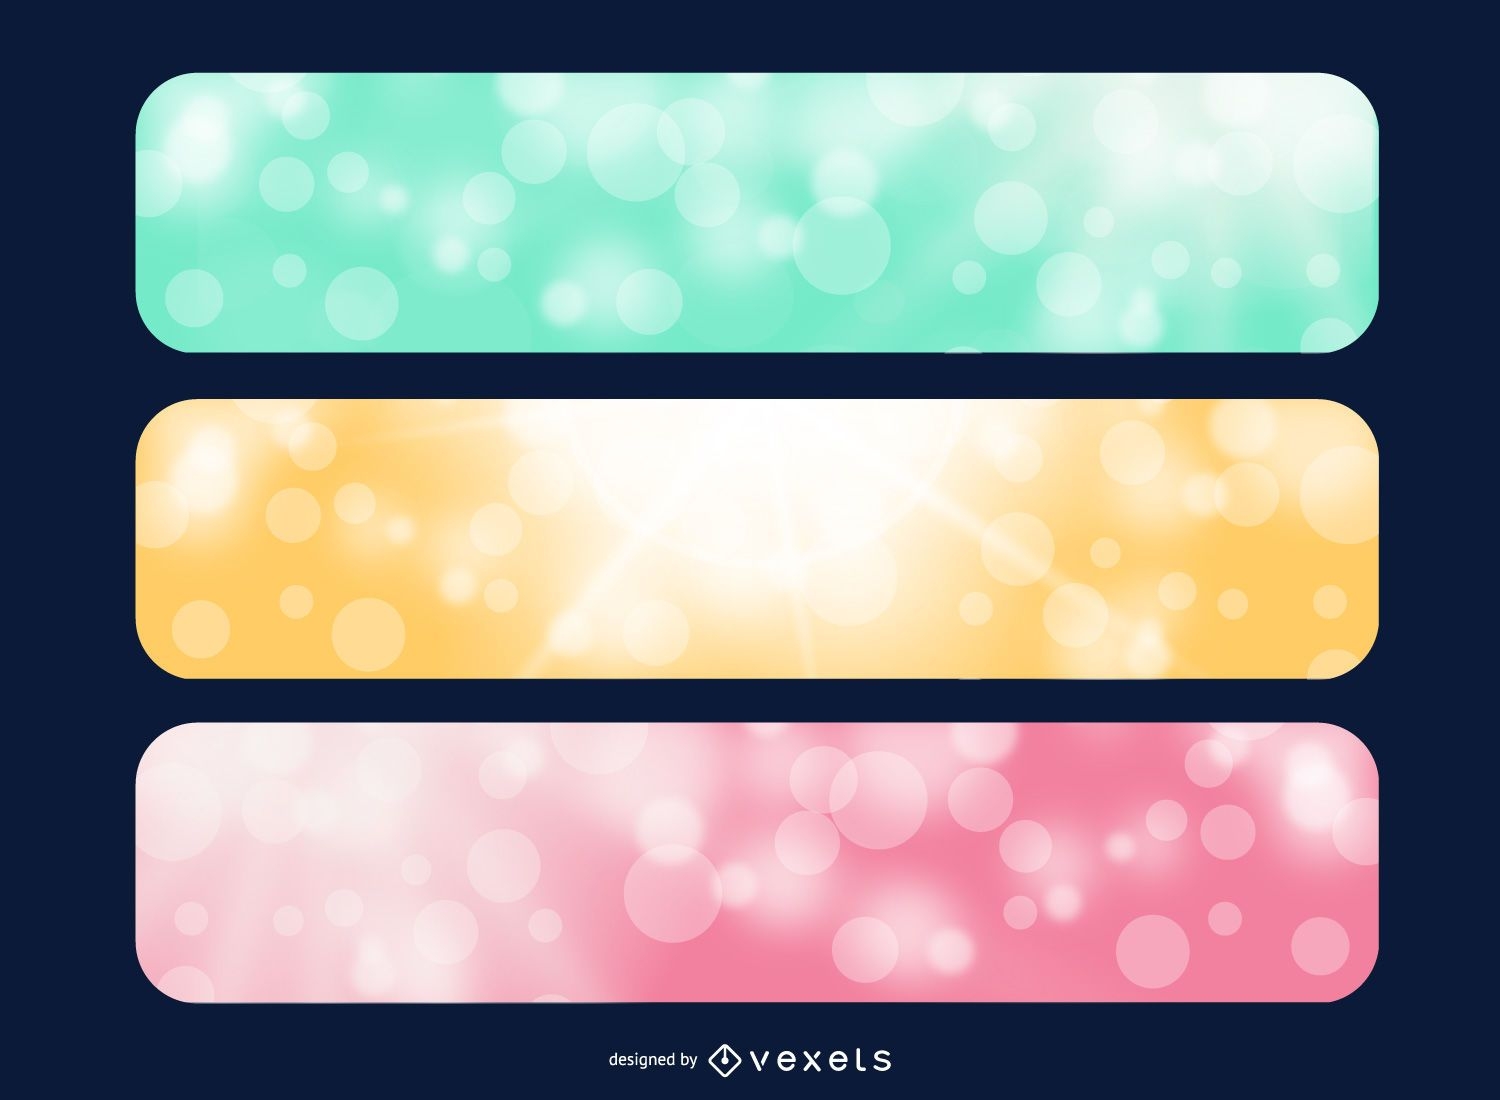 Shiny Sunlight Multicolored Banners